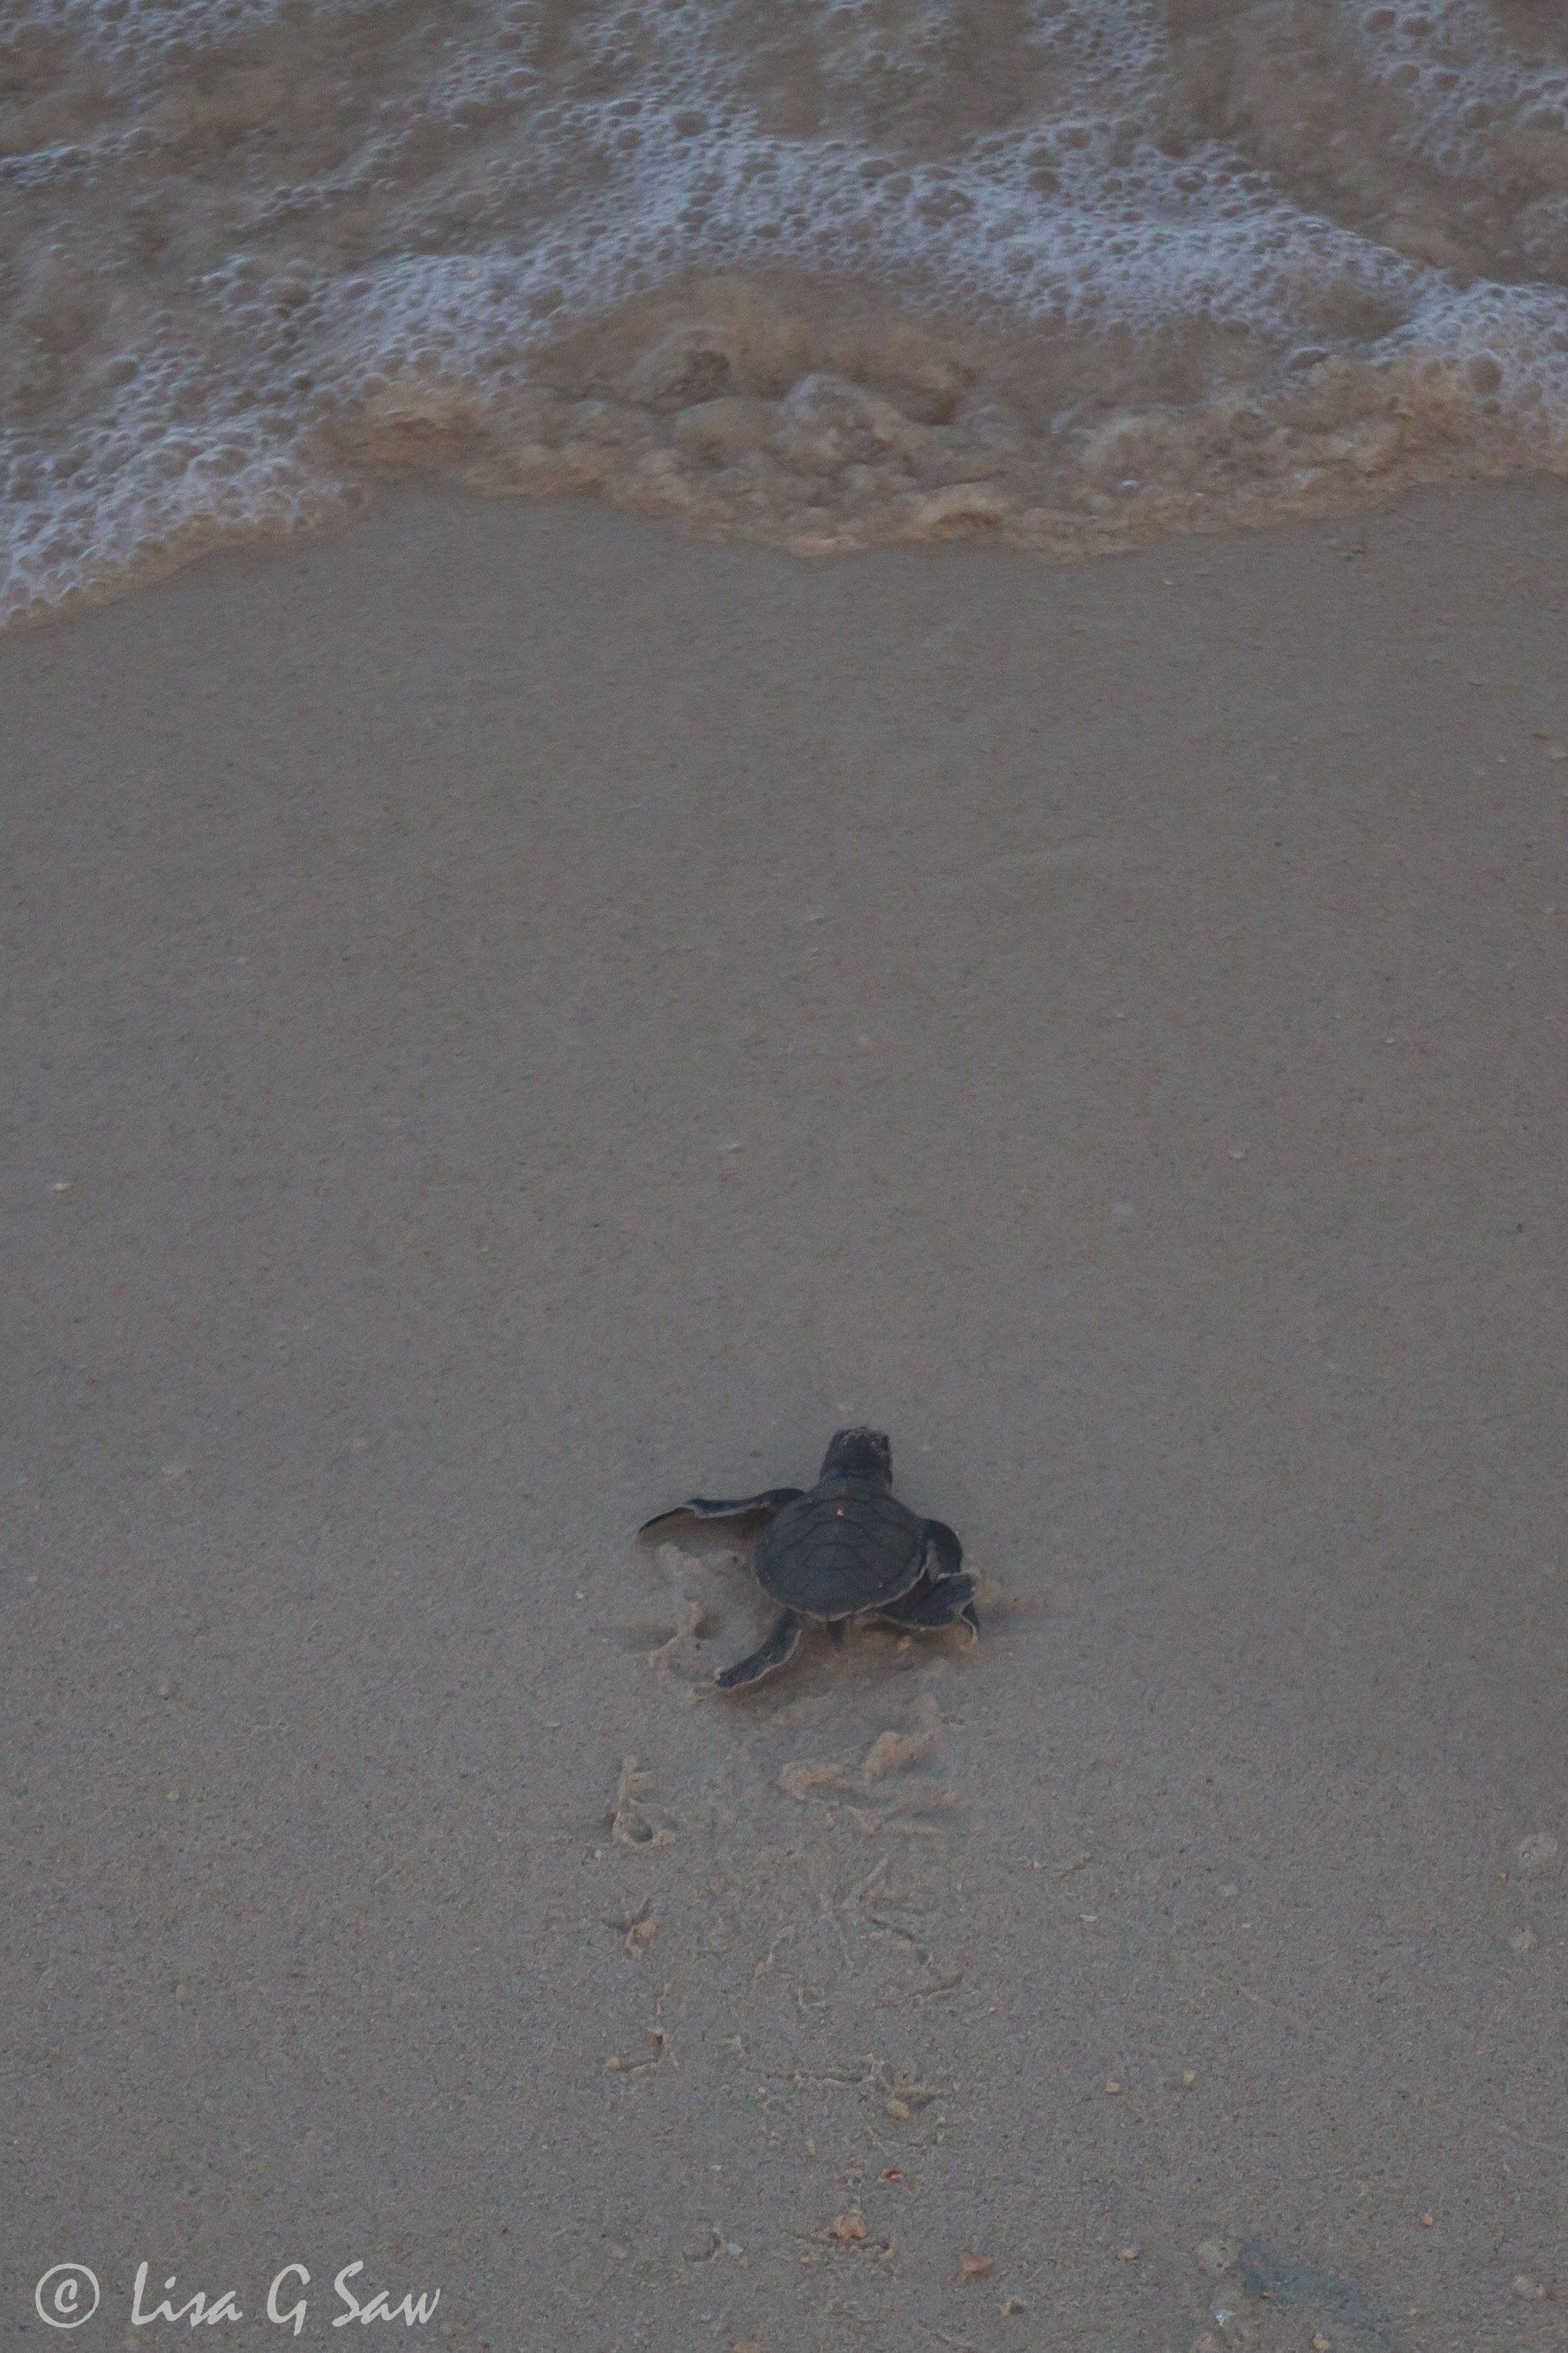 Green Sea Turtle hatchling making a dash to the water in daylight